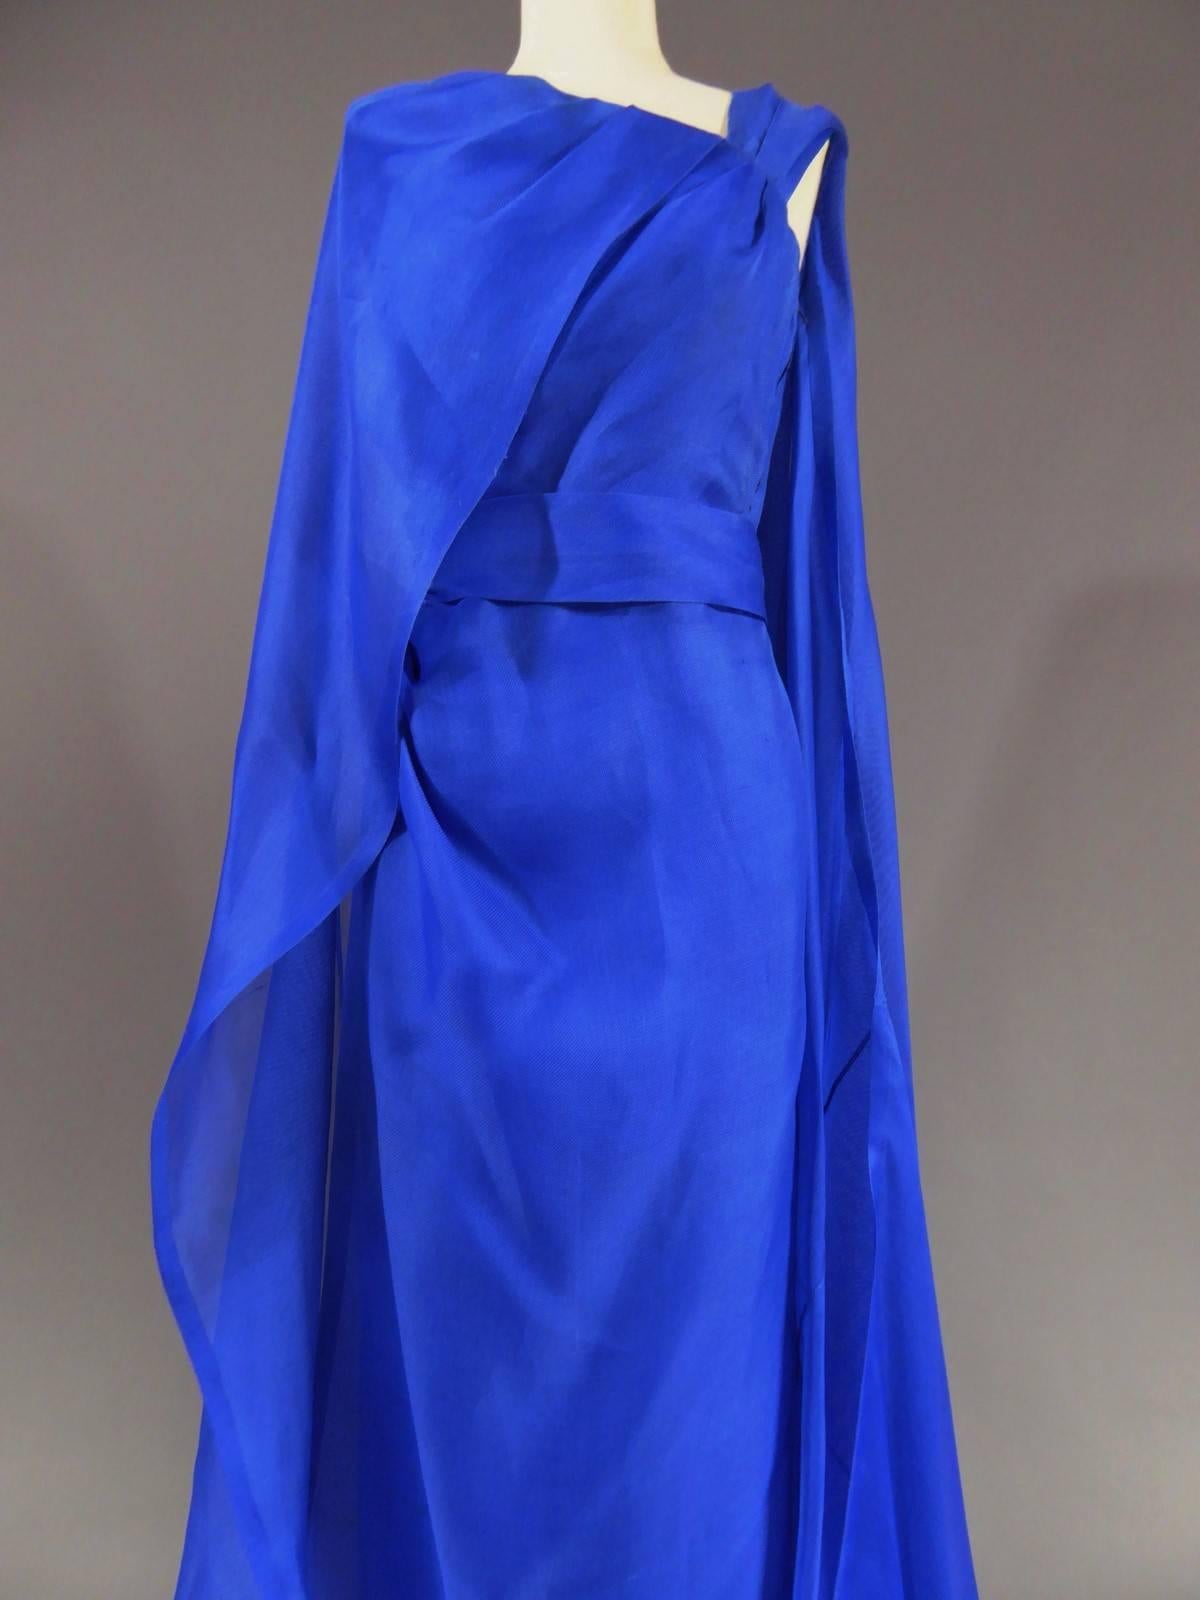 Circa 1980

France

Long evening dress Givenchy Haute Couture. Prototype workshop with bolduc n ° 97, Laura at Carmen. Magnificence of the drape reinforced by the presence of an integrated cape. Gazar light ultramarine blue. Integrated shoulder